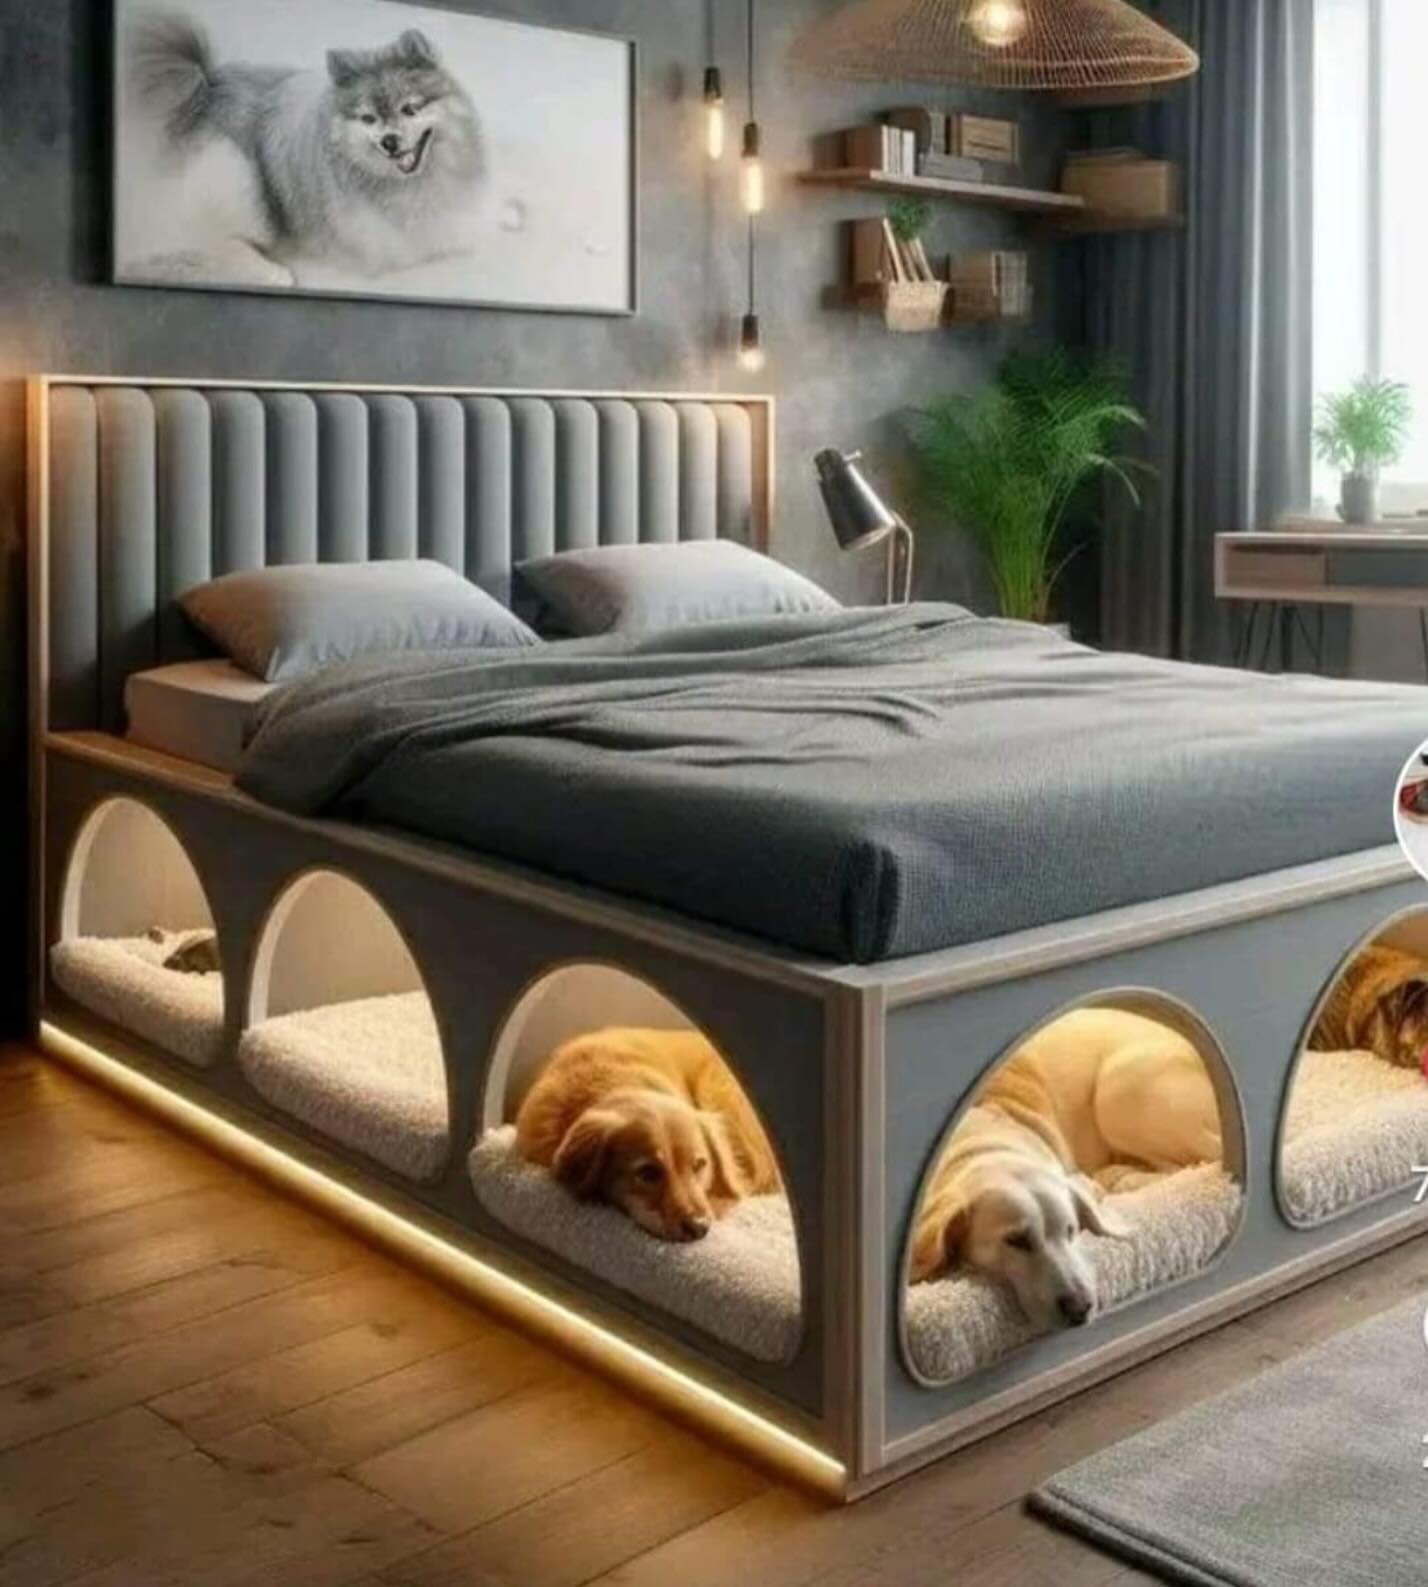 Well, I found my new bed 😂